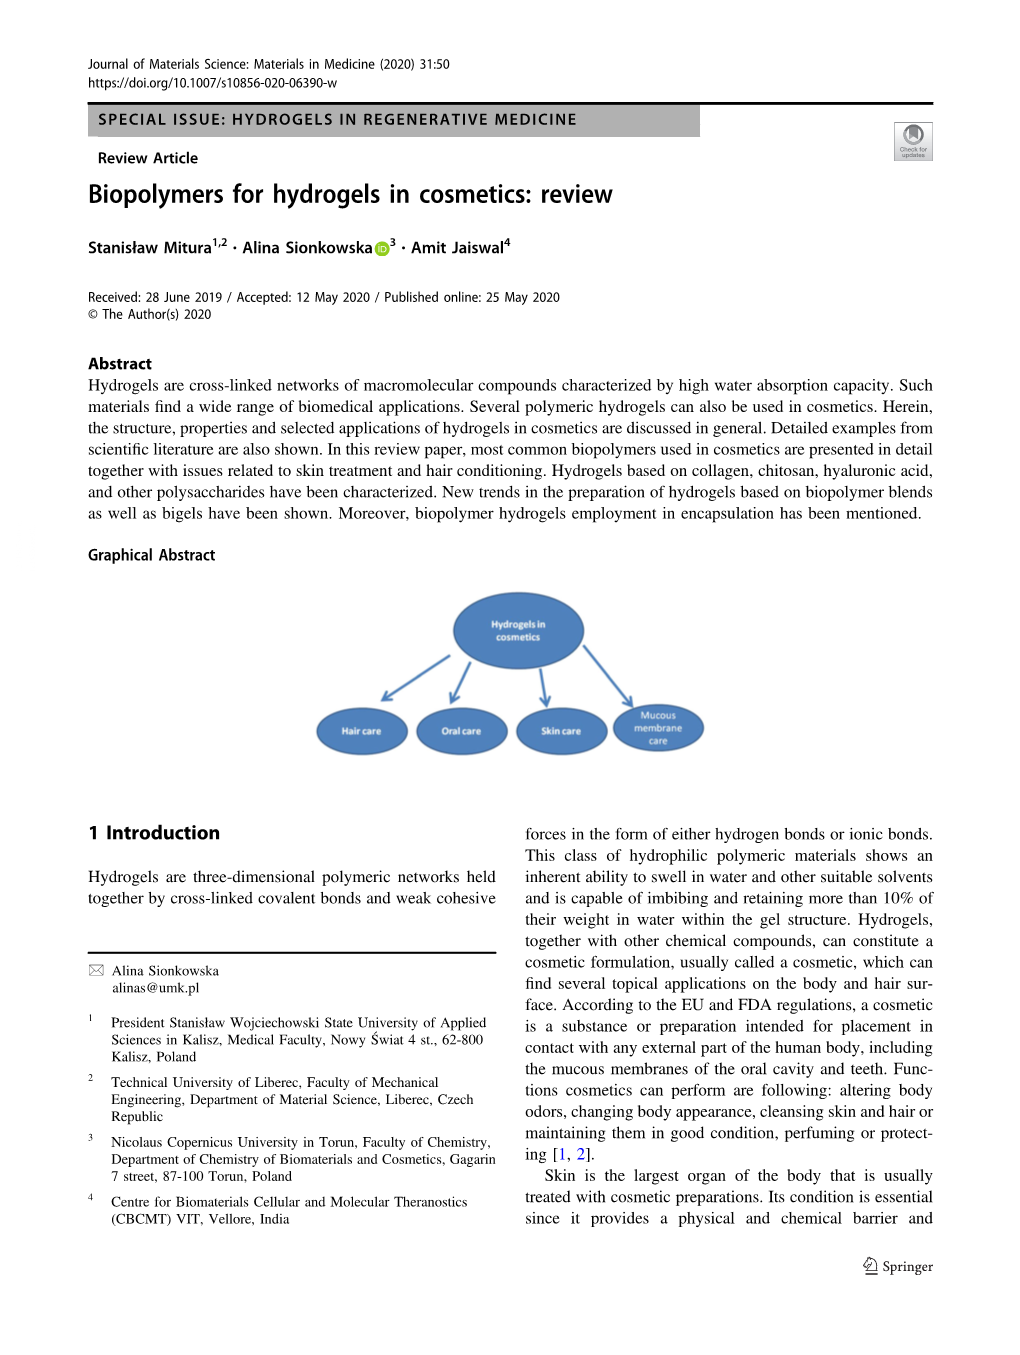 Biopolymers for Hydrogels in Cosmetics: Review